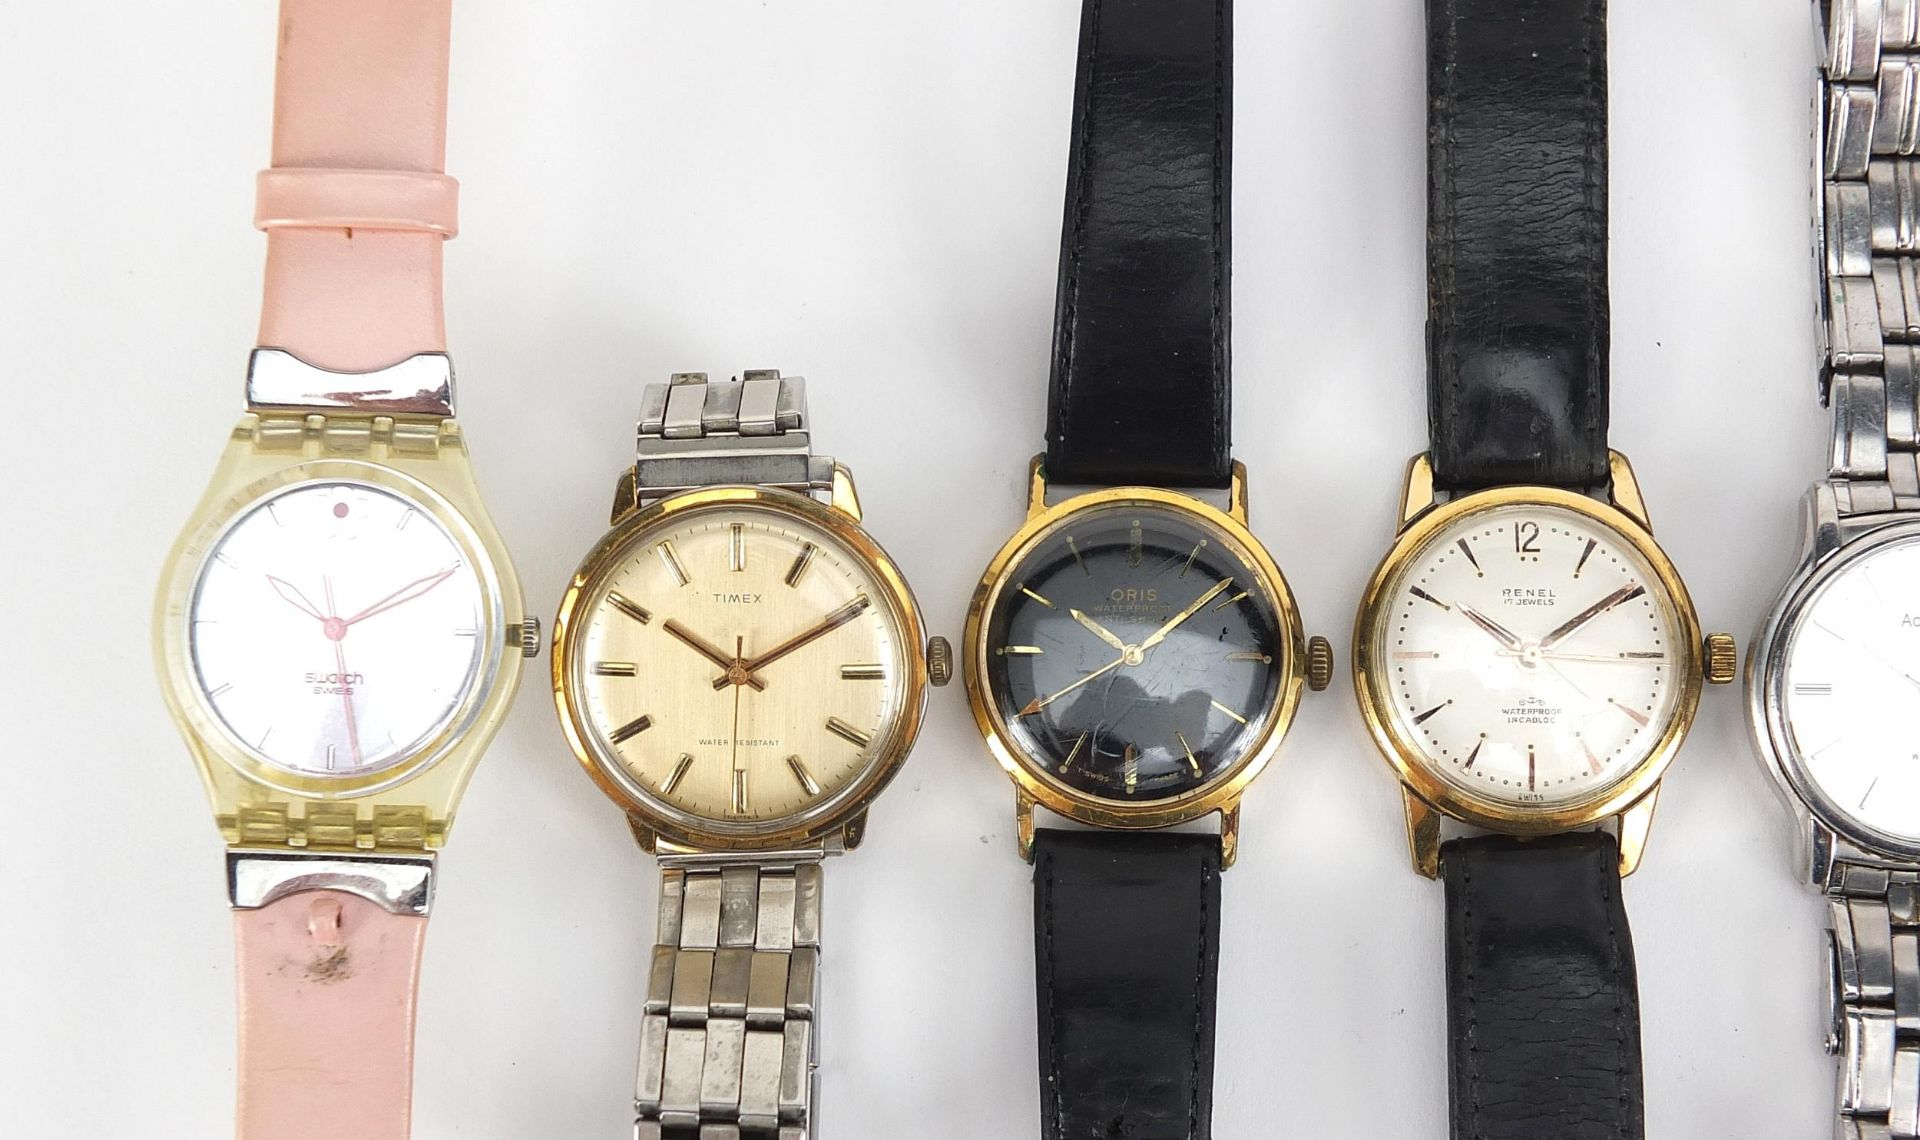 Vintage and later gentlemen's and ladies wristwatches including Renel, Timex, Seiko and Oris - Image 2 of 7